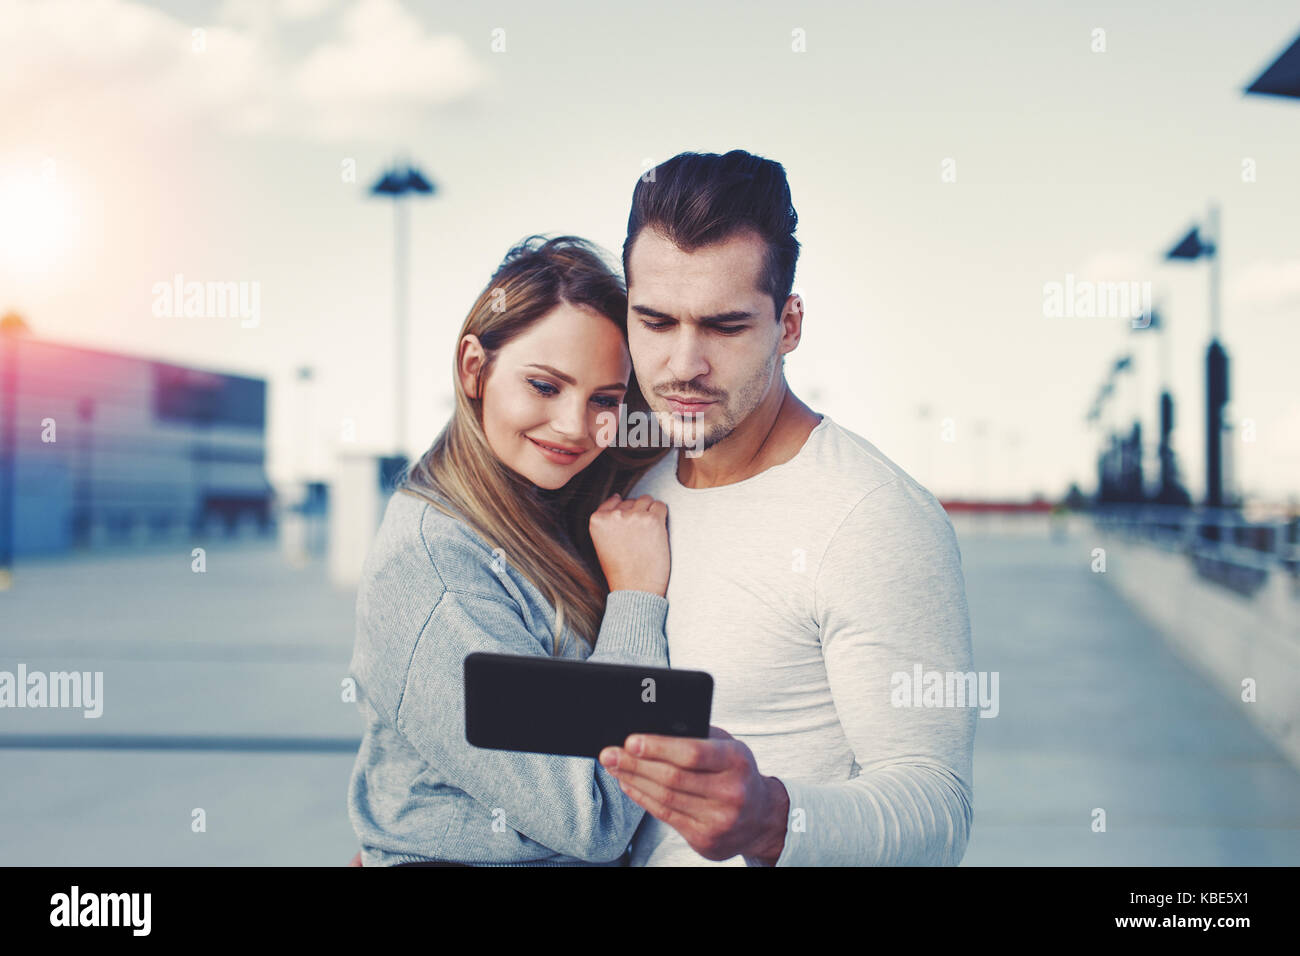 Young smart businesswoman holding tablet and eyeglasses cinematic style Stock Photo